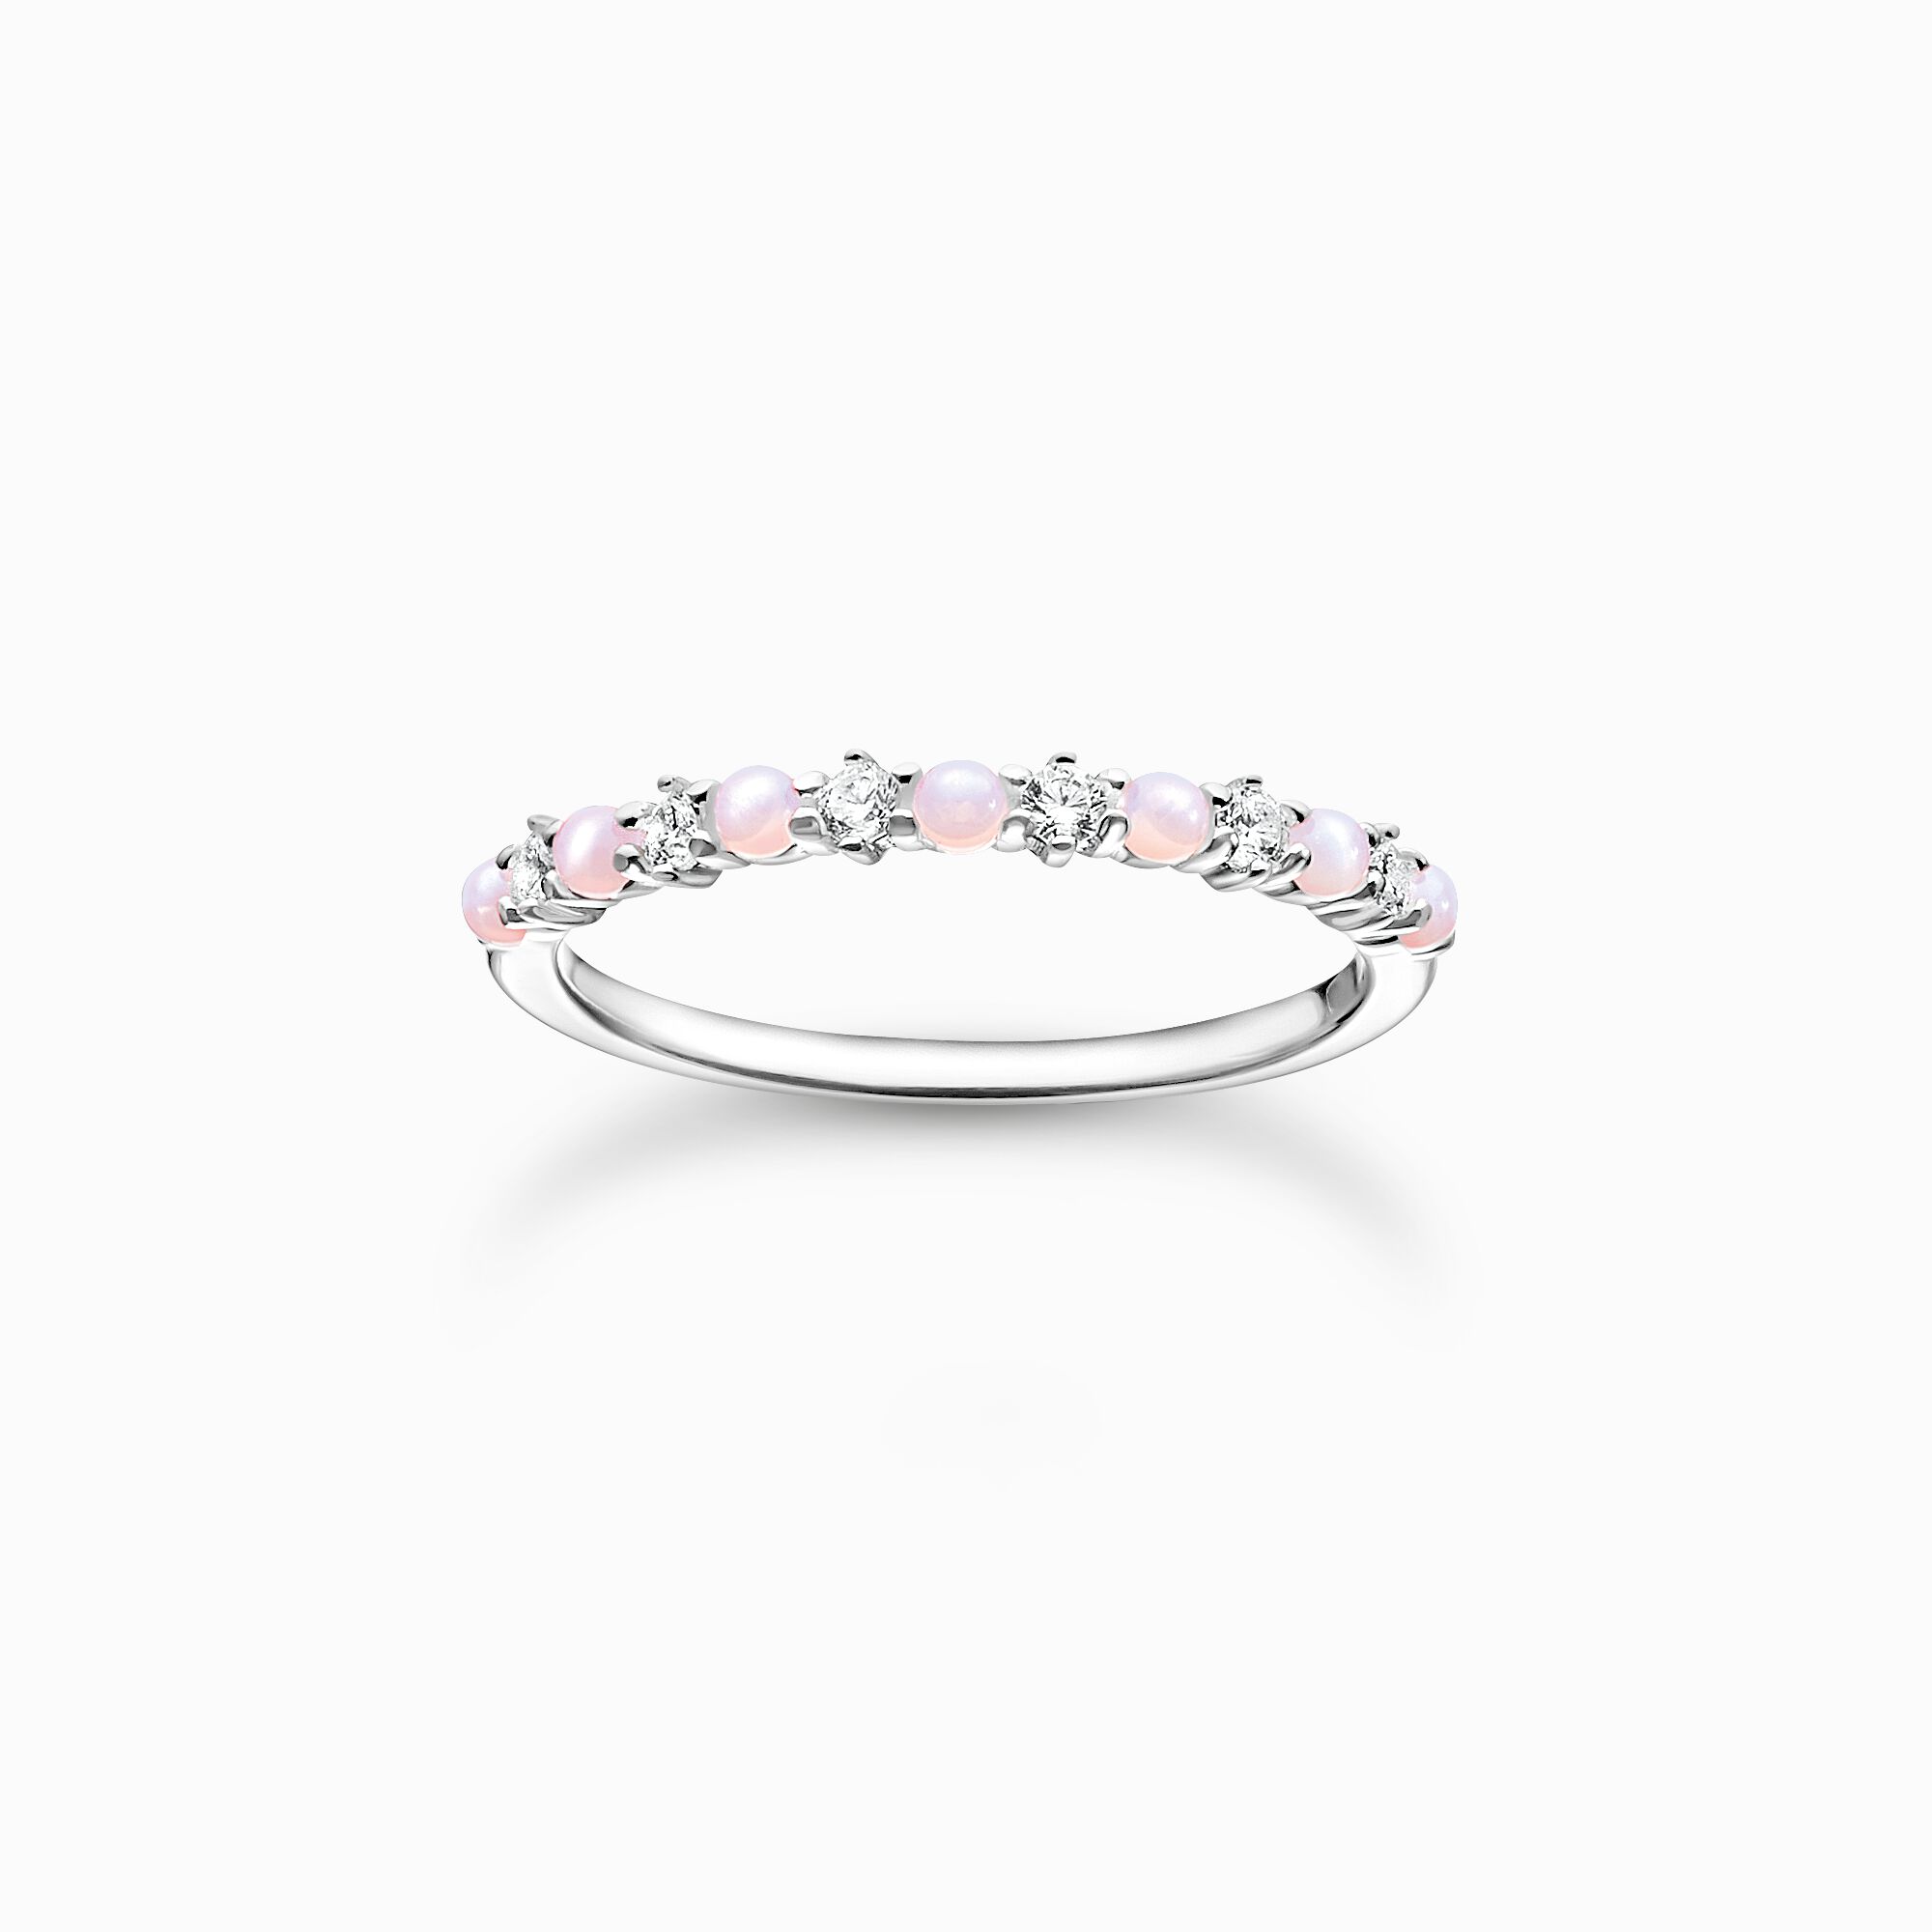 Ring for women with sparkling stones | THOMAS SABO